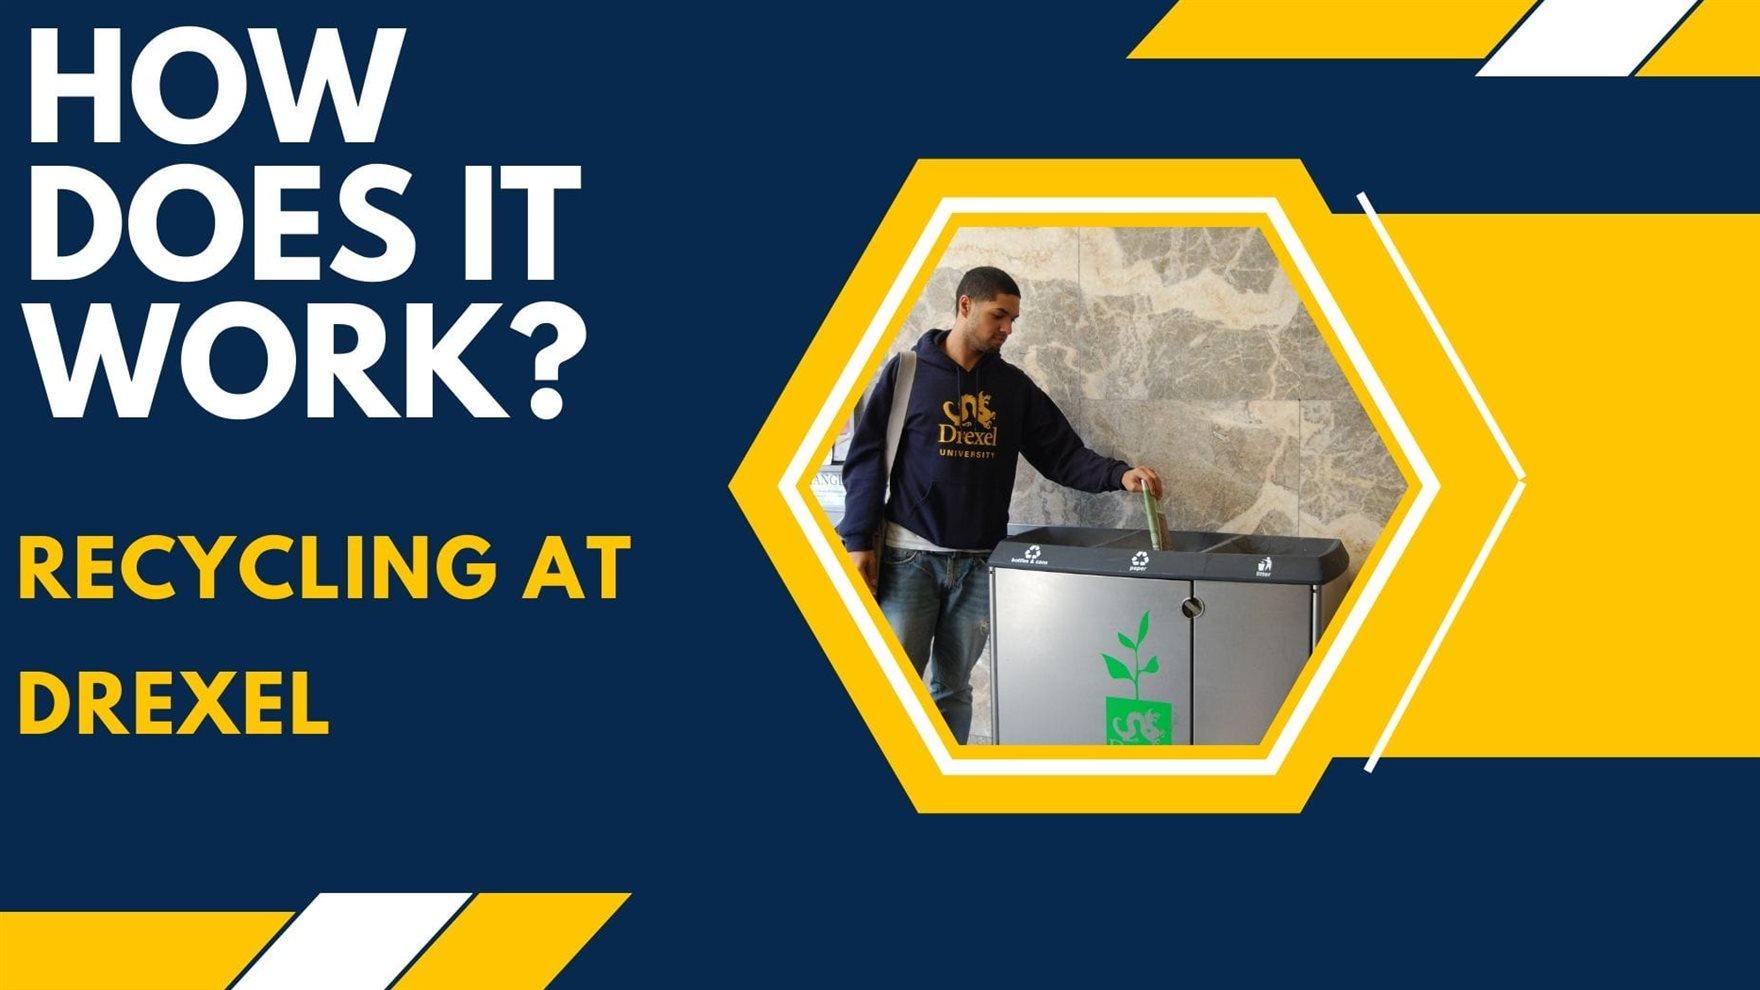 &quot;How Does it Work? Recycling at Drexel&quot; written next to a graphic of a person putting something in a recycling bin.